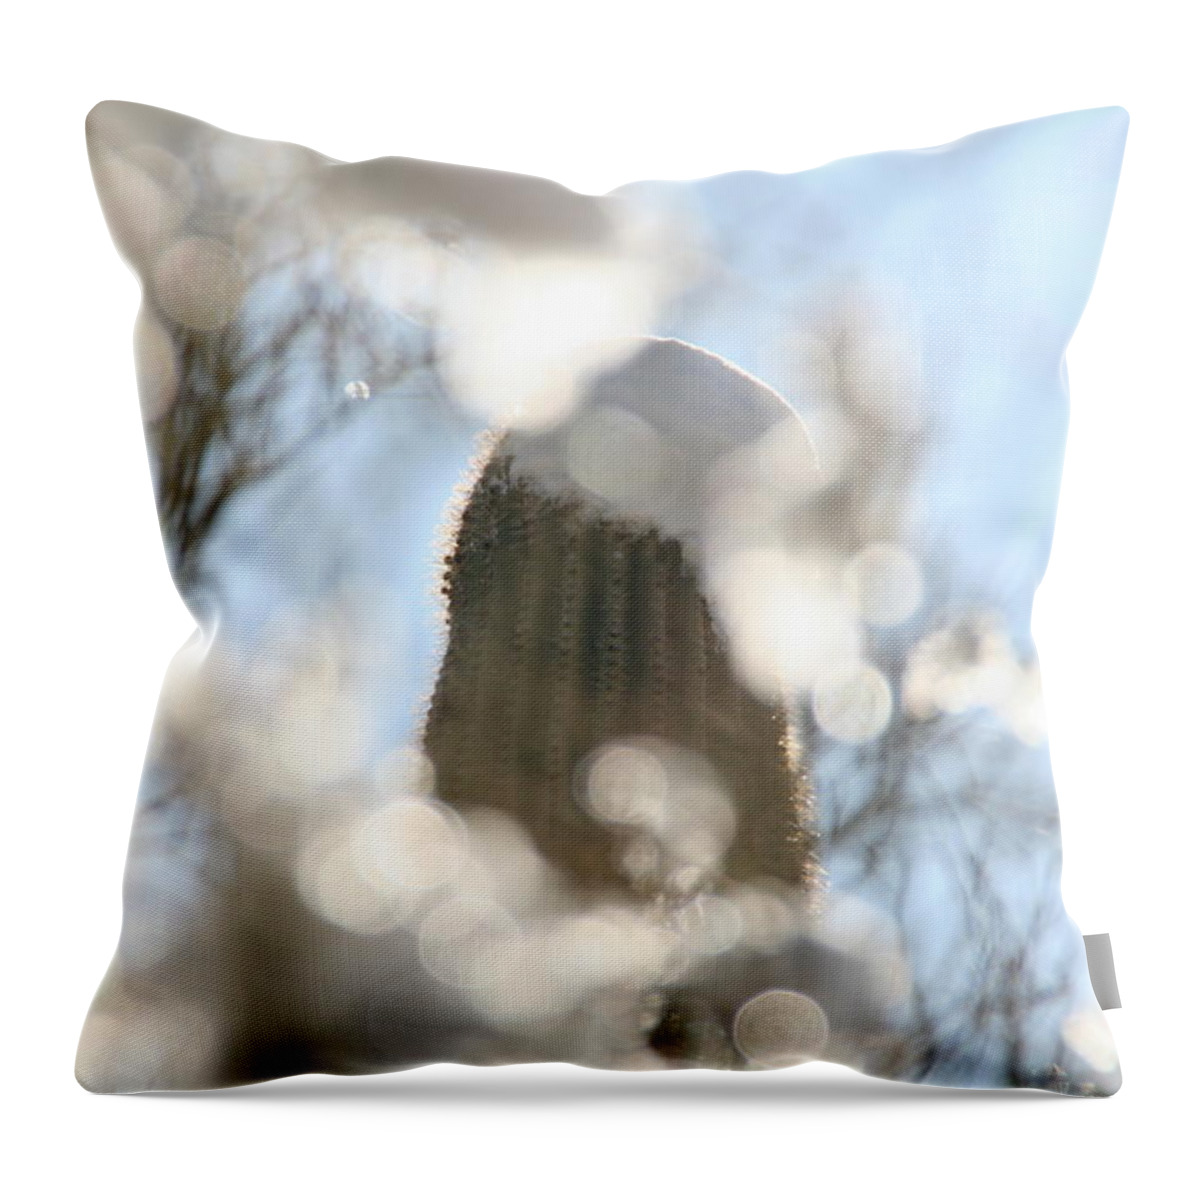 Southwest Throw Pillow featuring the photograph Through The Ice by David S Reynolds